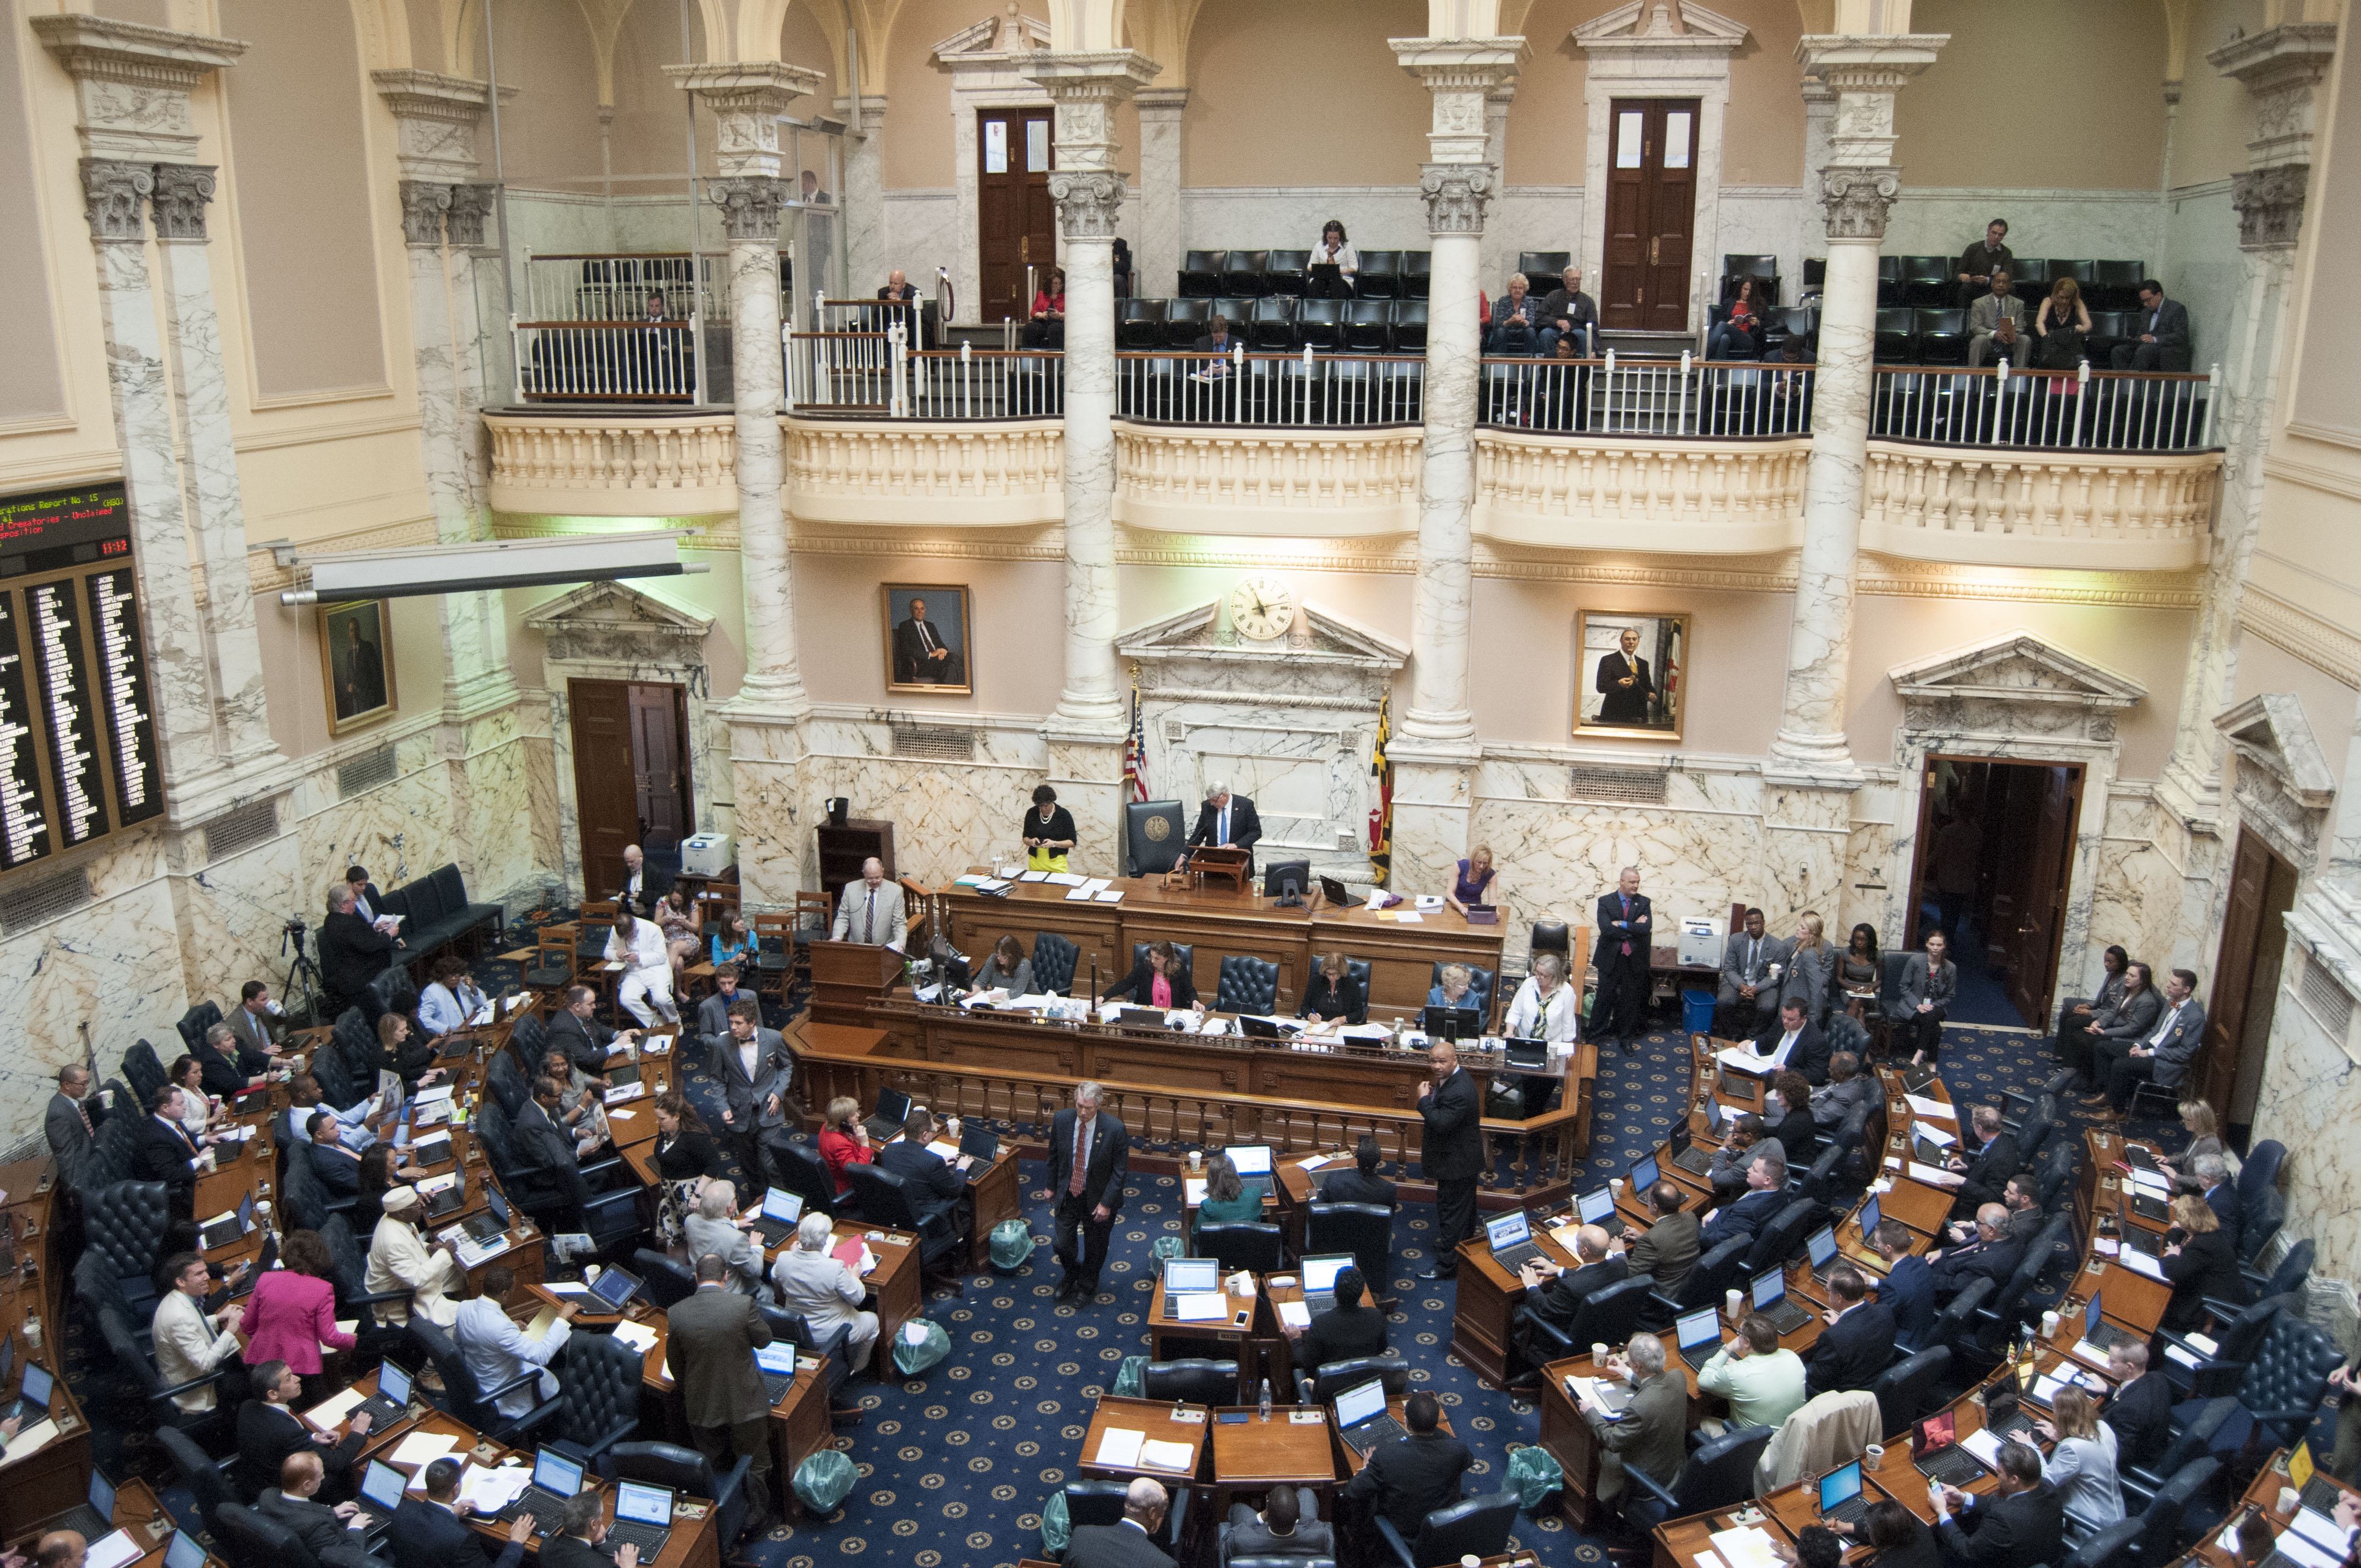 Interns needed to cover Maryland General Assembly, politics